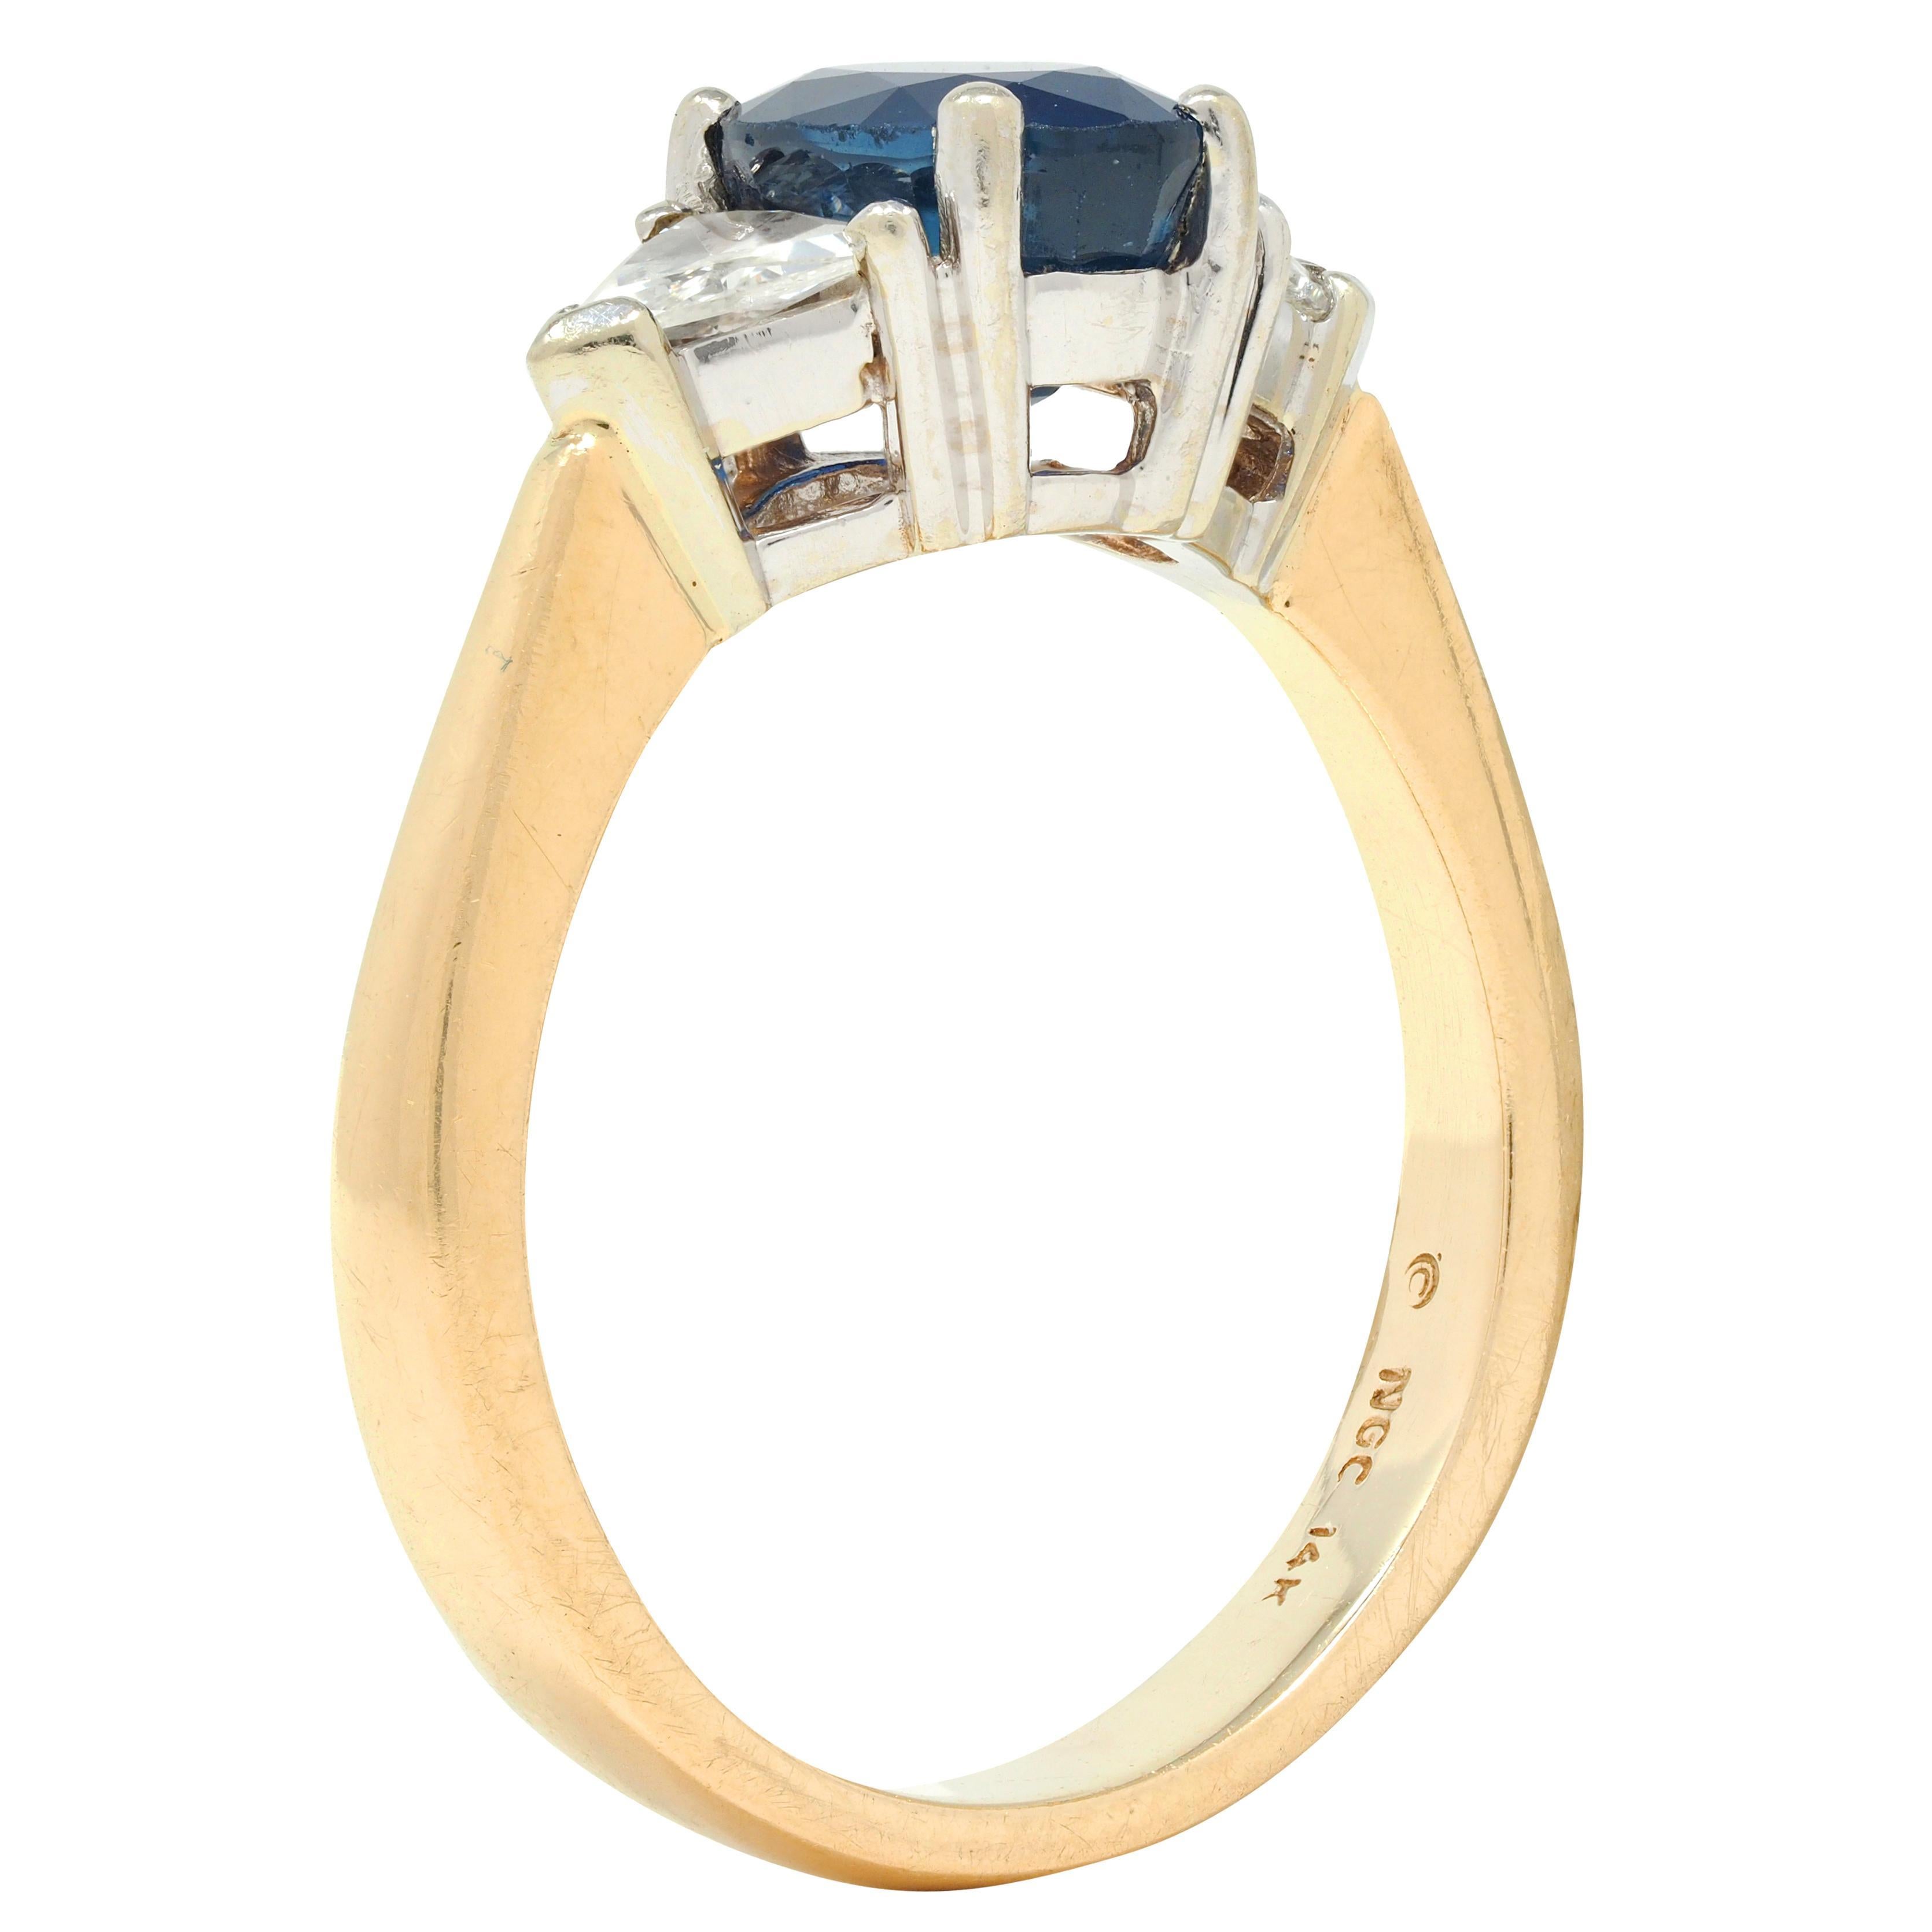 Centering an oval cut sapphire weighing approximately 2.23 carats total 
Transparent medium blue in color and prong set in white gold basket
Flanked by trilliant cut diamonds prong set in white gold basket 
Weighing approximately 0.48 carat total -